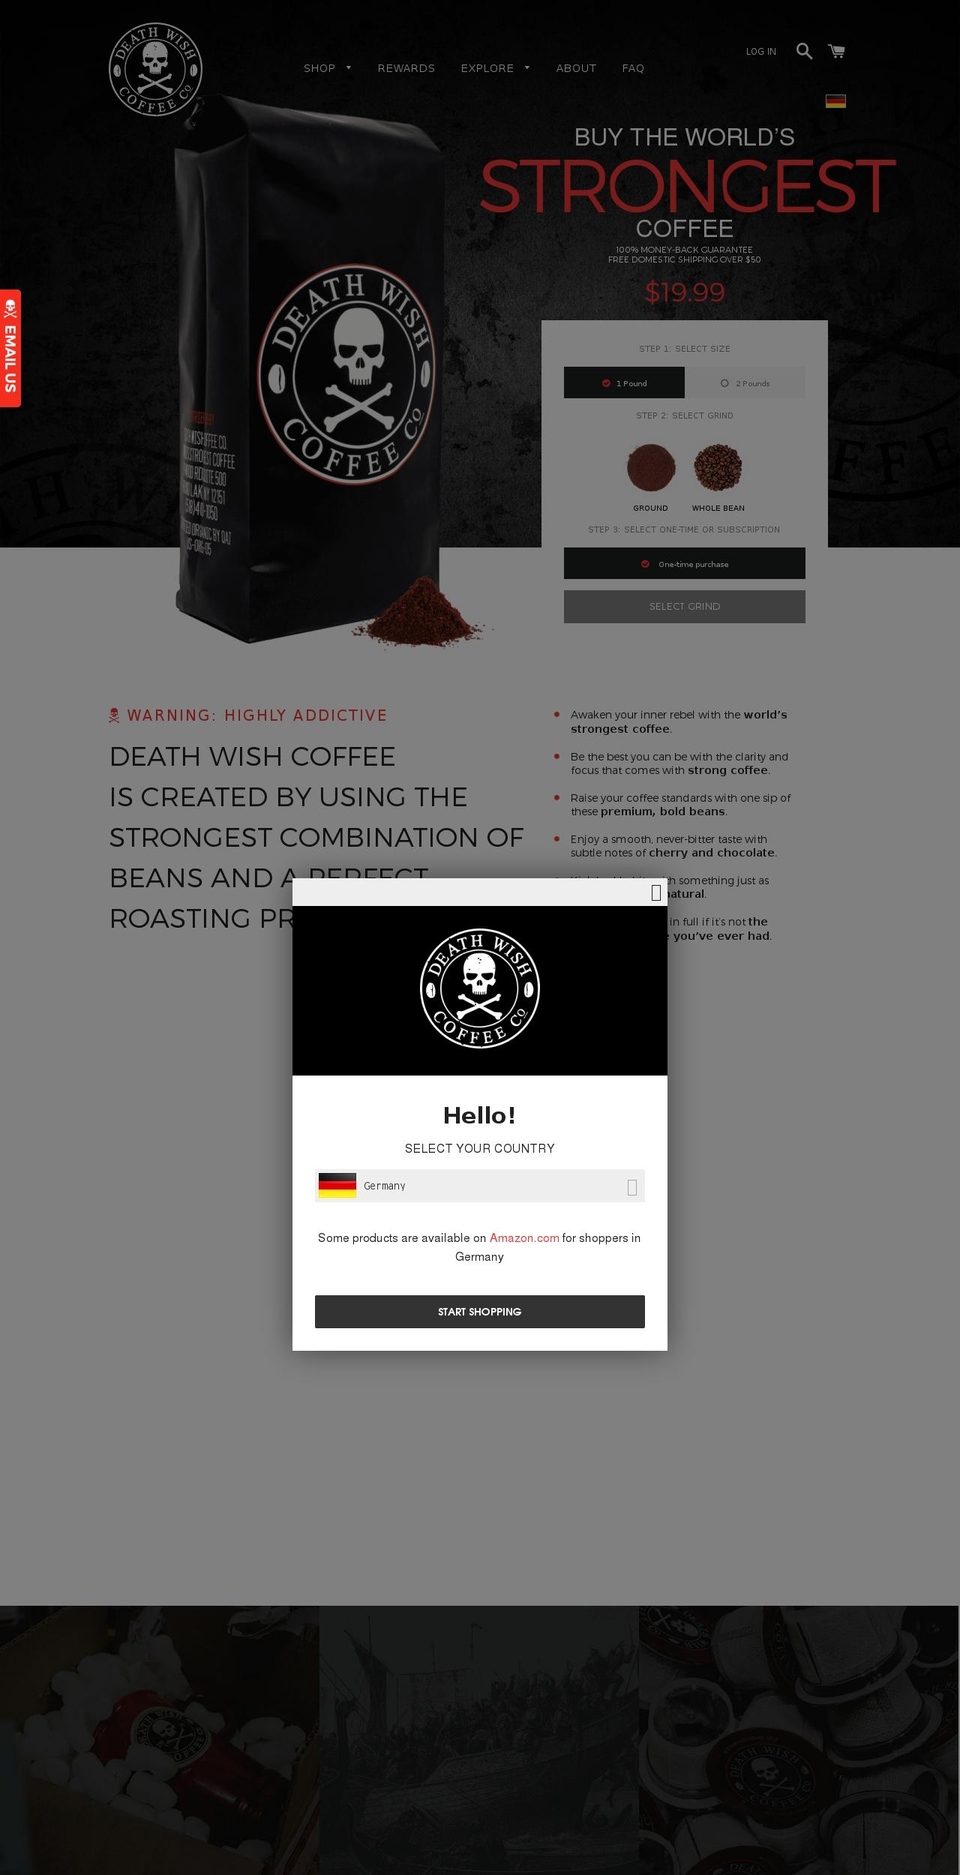 Production Shopify theme site example deathwishcoffee.com